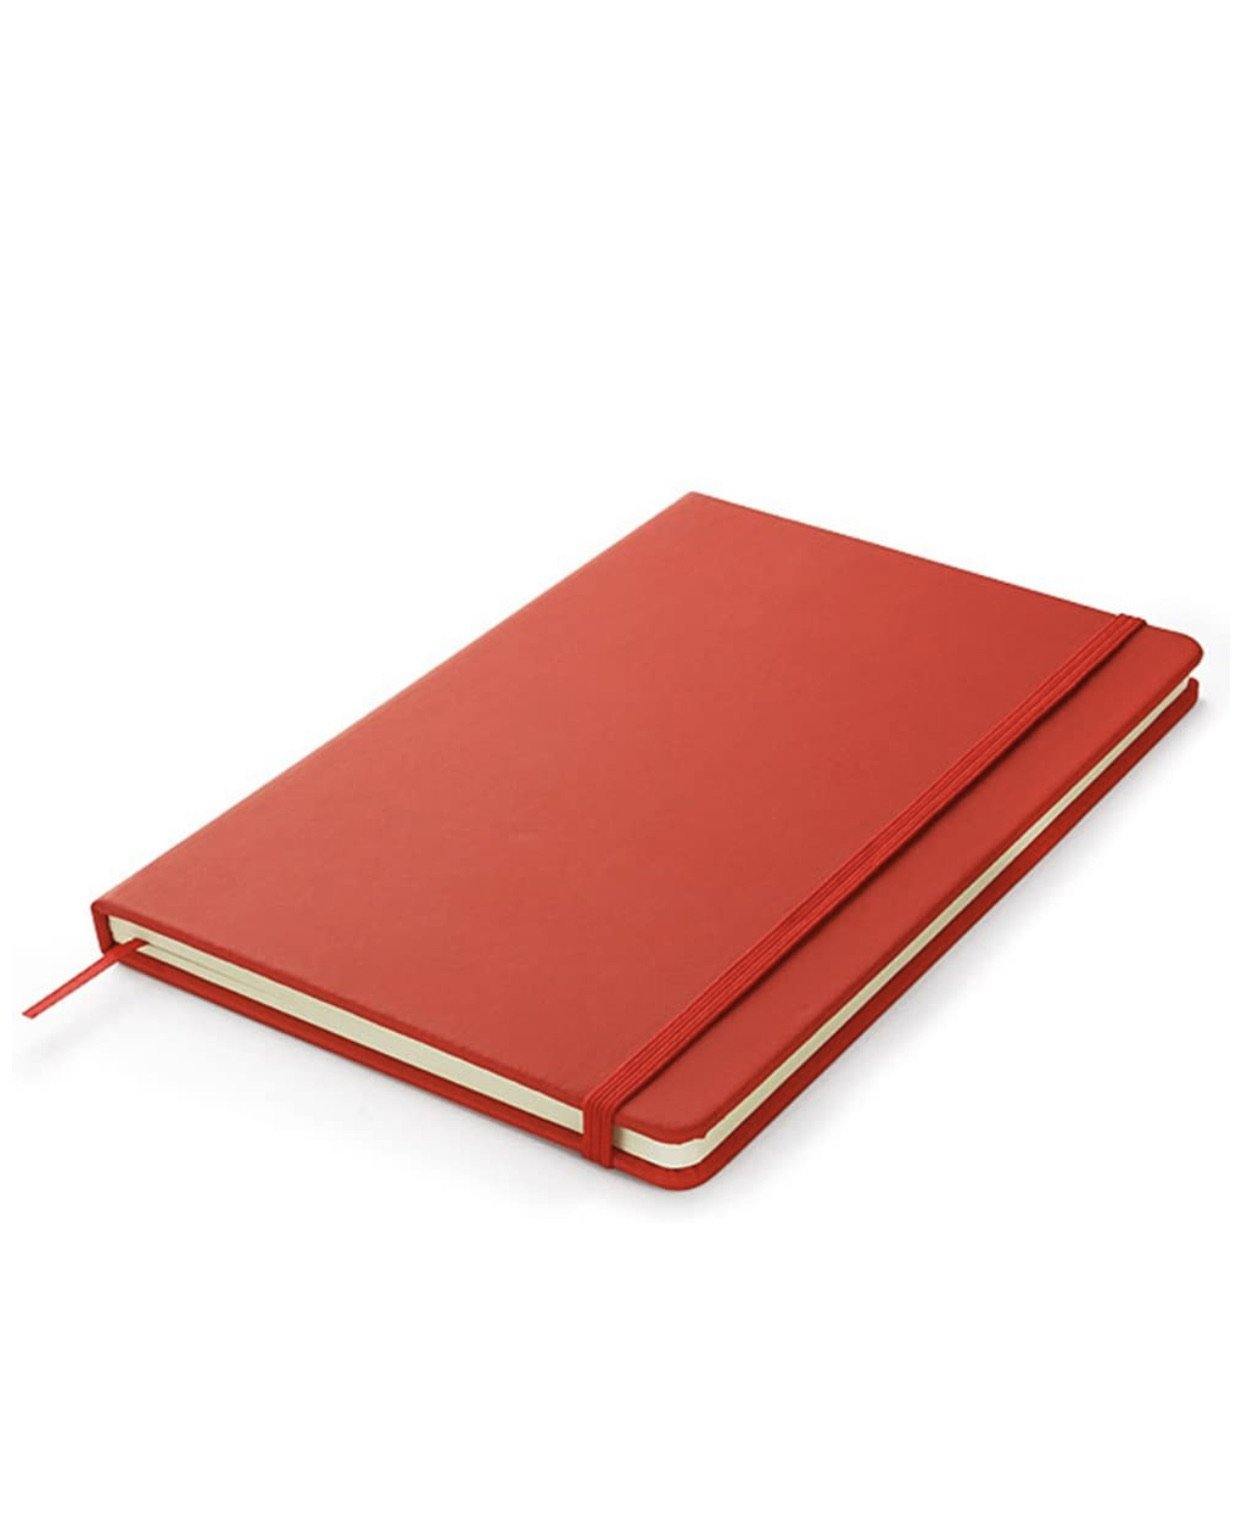 Notebook | Pu Leather Hardback Notebook With Lined Sheets | Personalised With Your Initials Or Name - PersonalisebyLisa